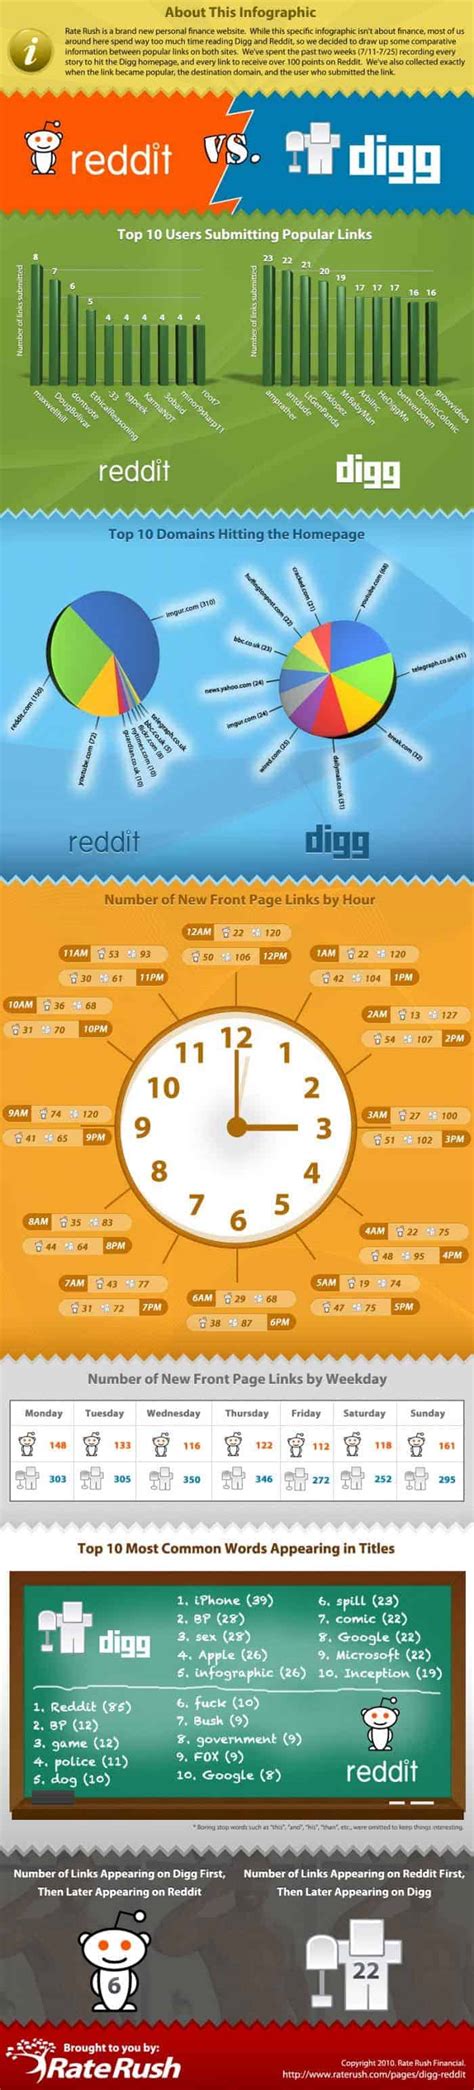 Reddit Vs Digg Daily Infographic